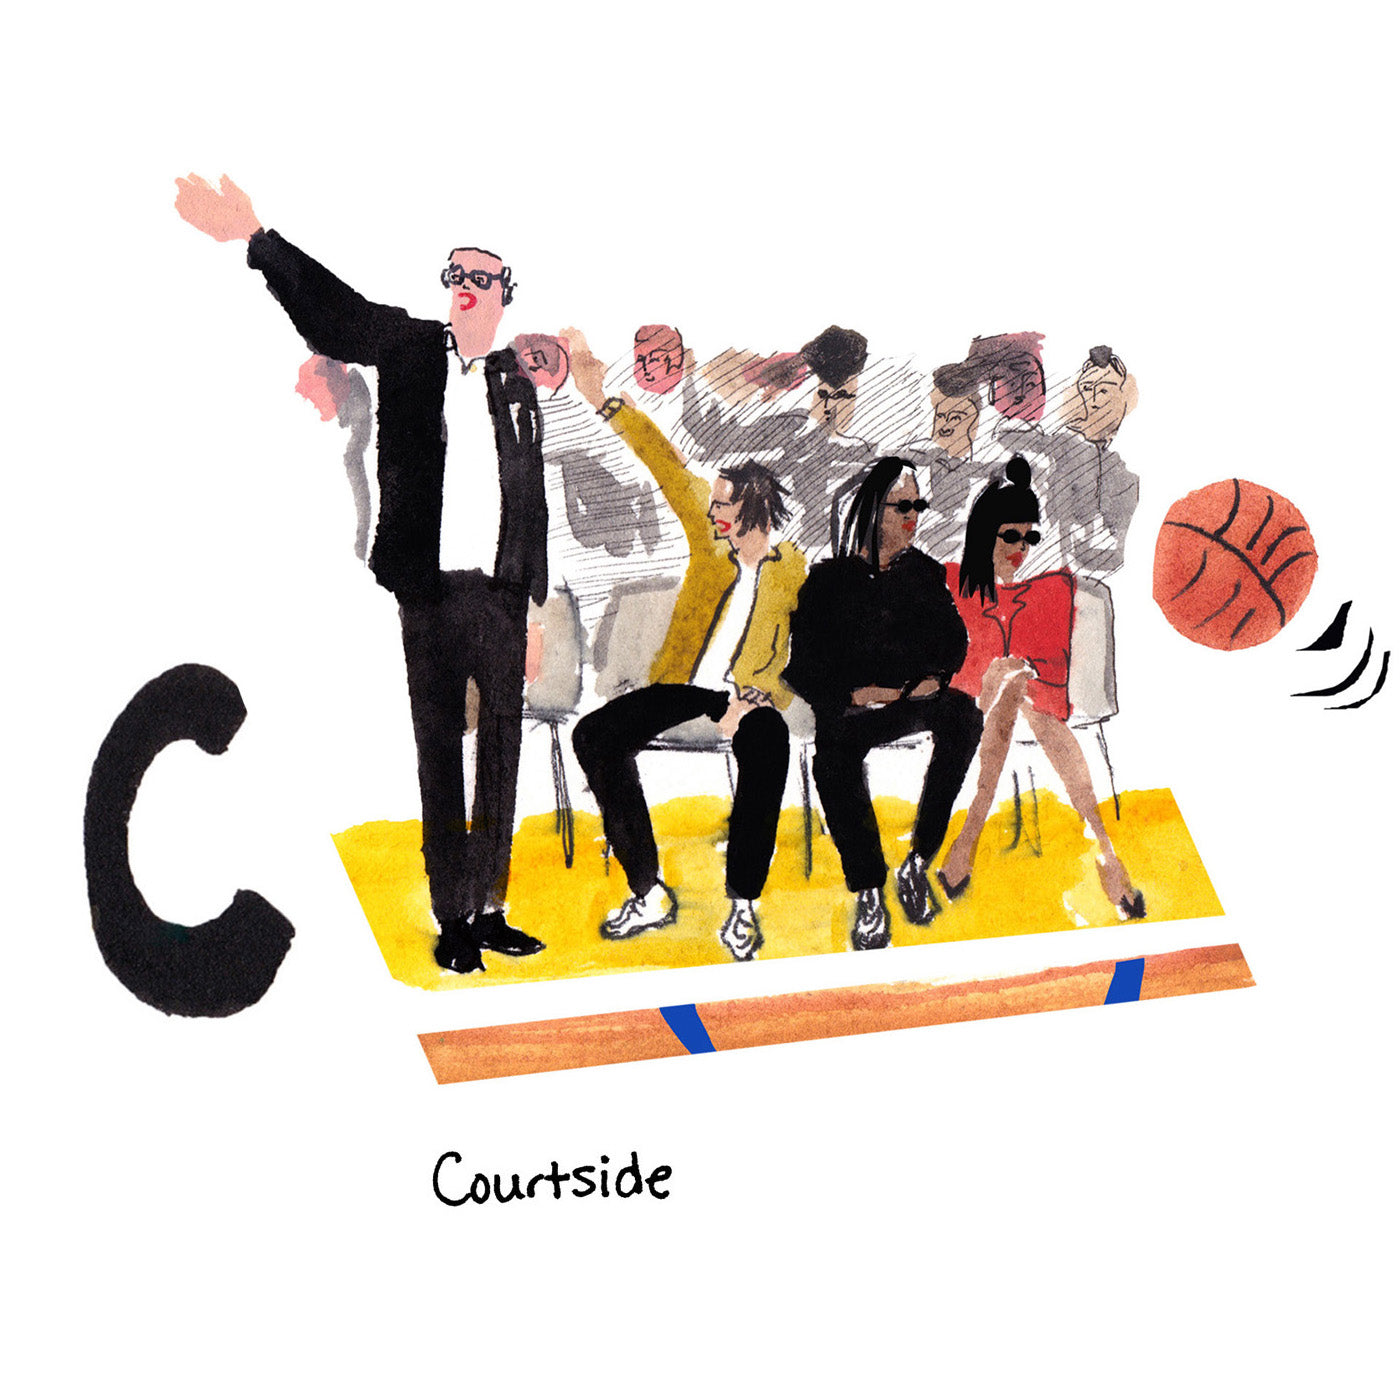 C is for Courtside. Courtside seats at Lakers games are a chic local pastime for Los Angelenos and visitors, frequented by celebrities such as Jack Nicholson, Offset and Cardi B.